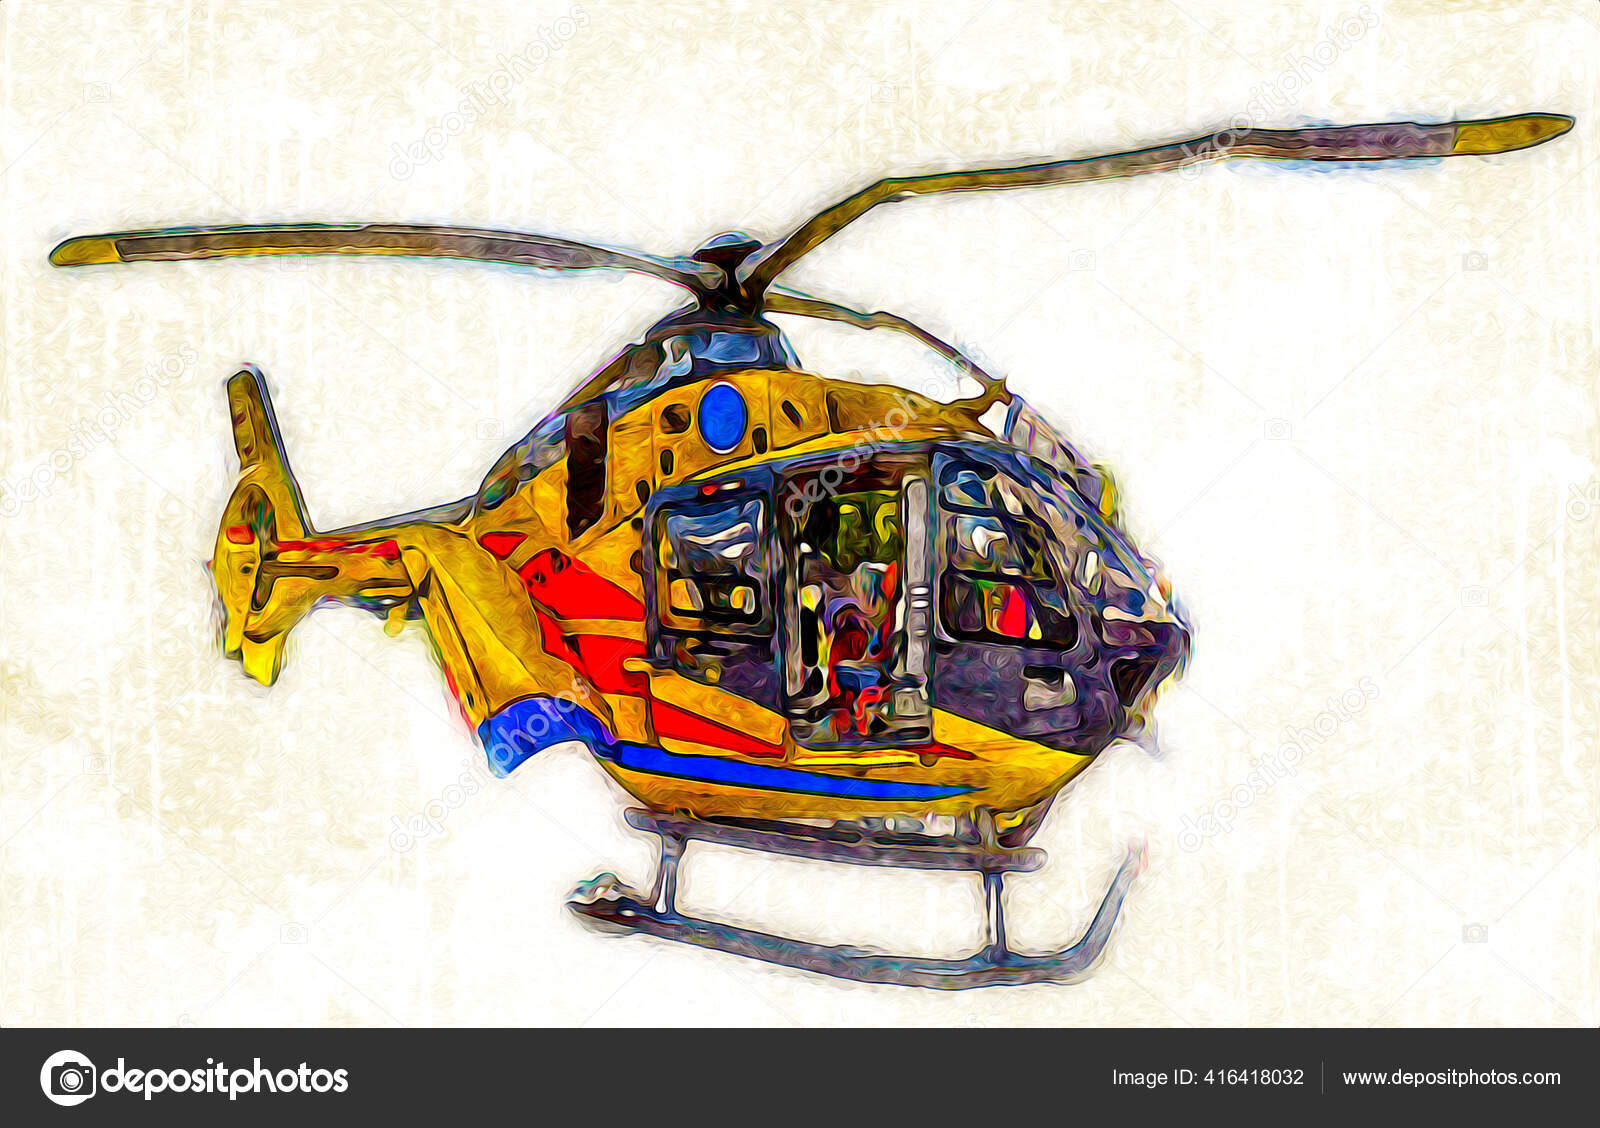 How to draw helicopter / LetsDrawIt